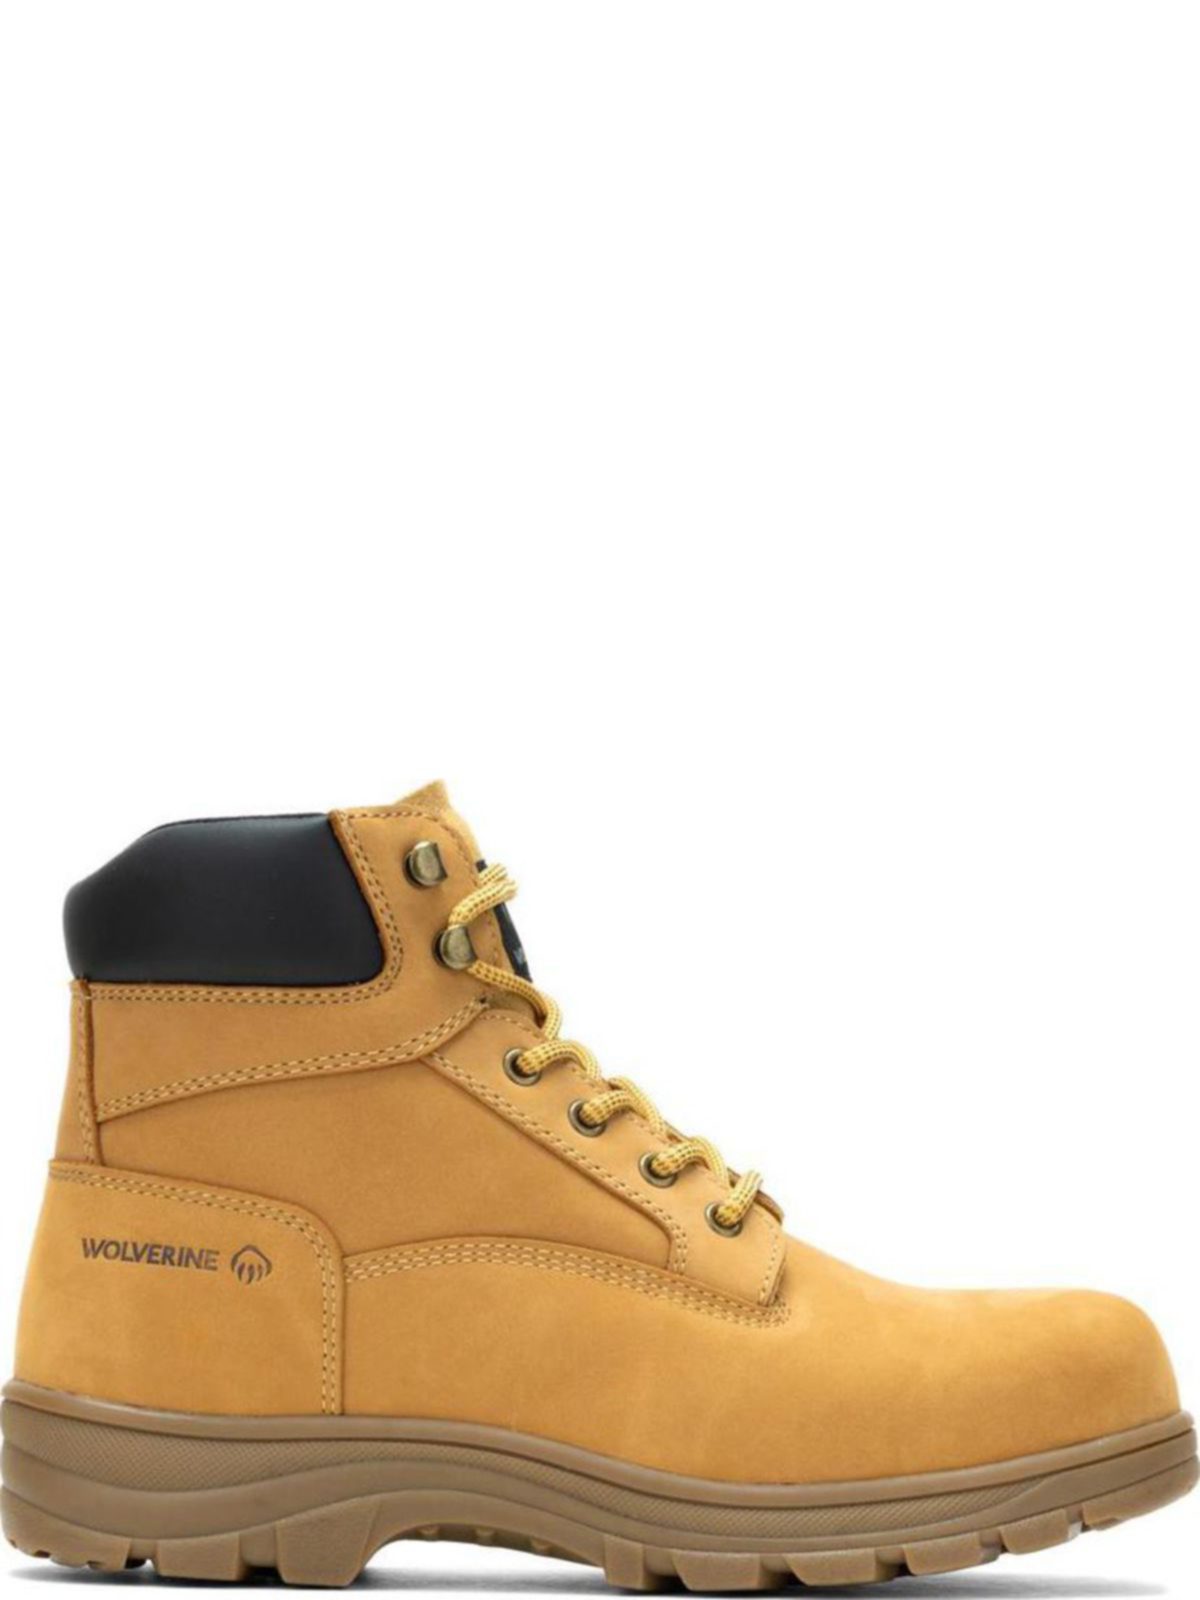 Shop Wolverine Mens Carlsbad Wheat Casual Boot W231128 | Save 20% ...